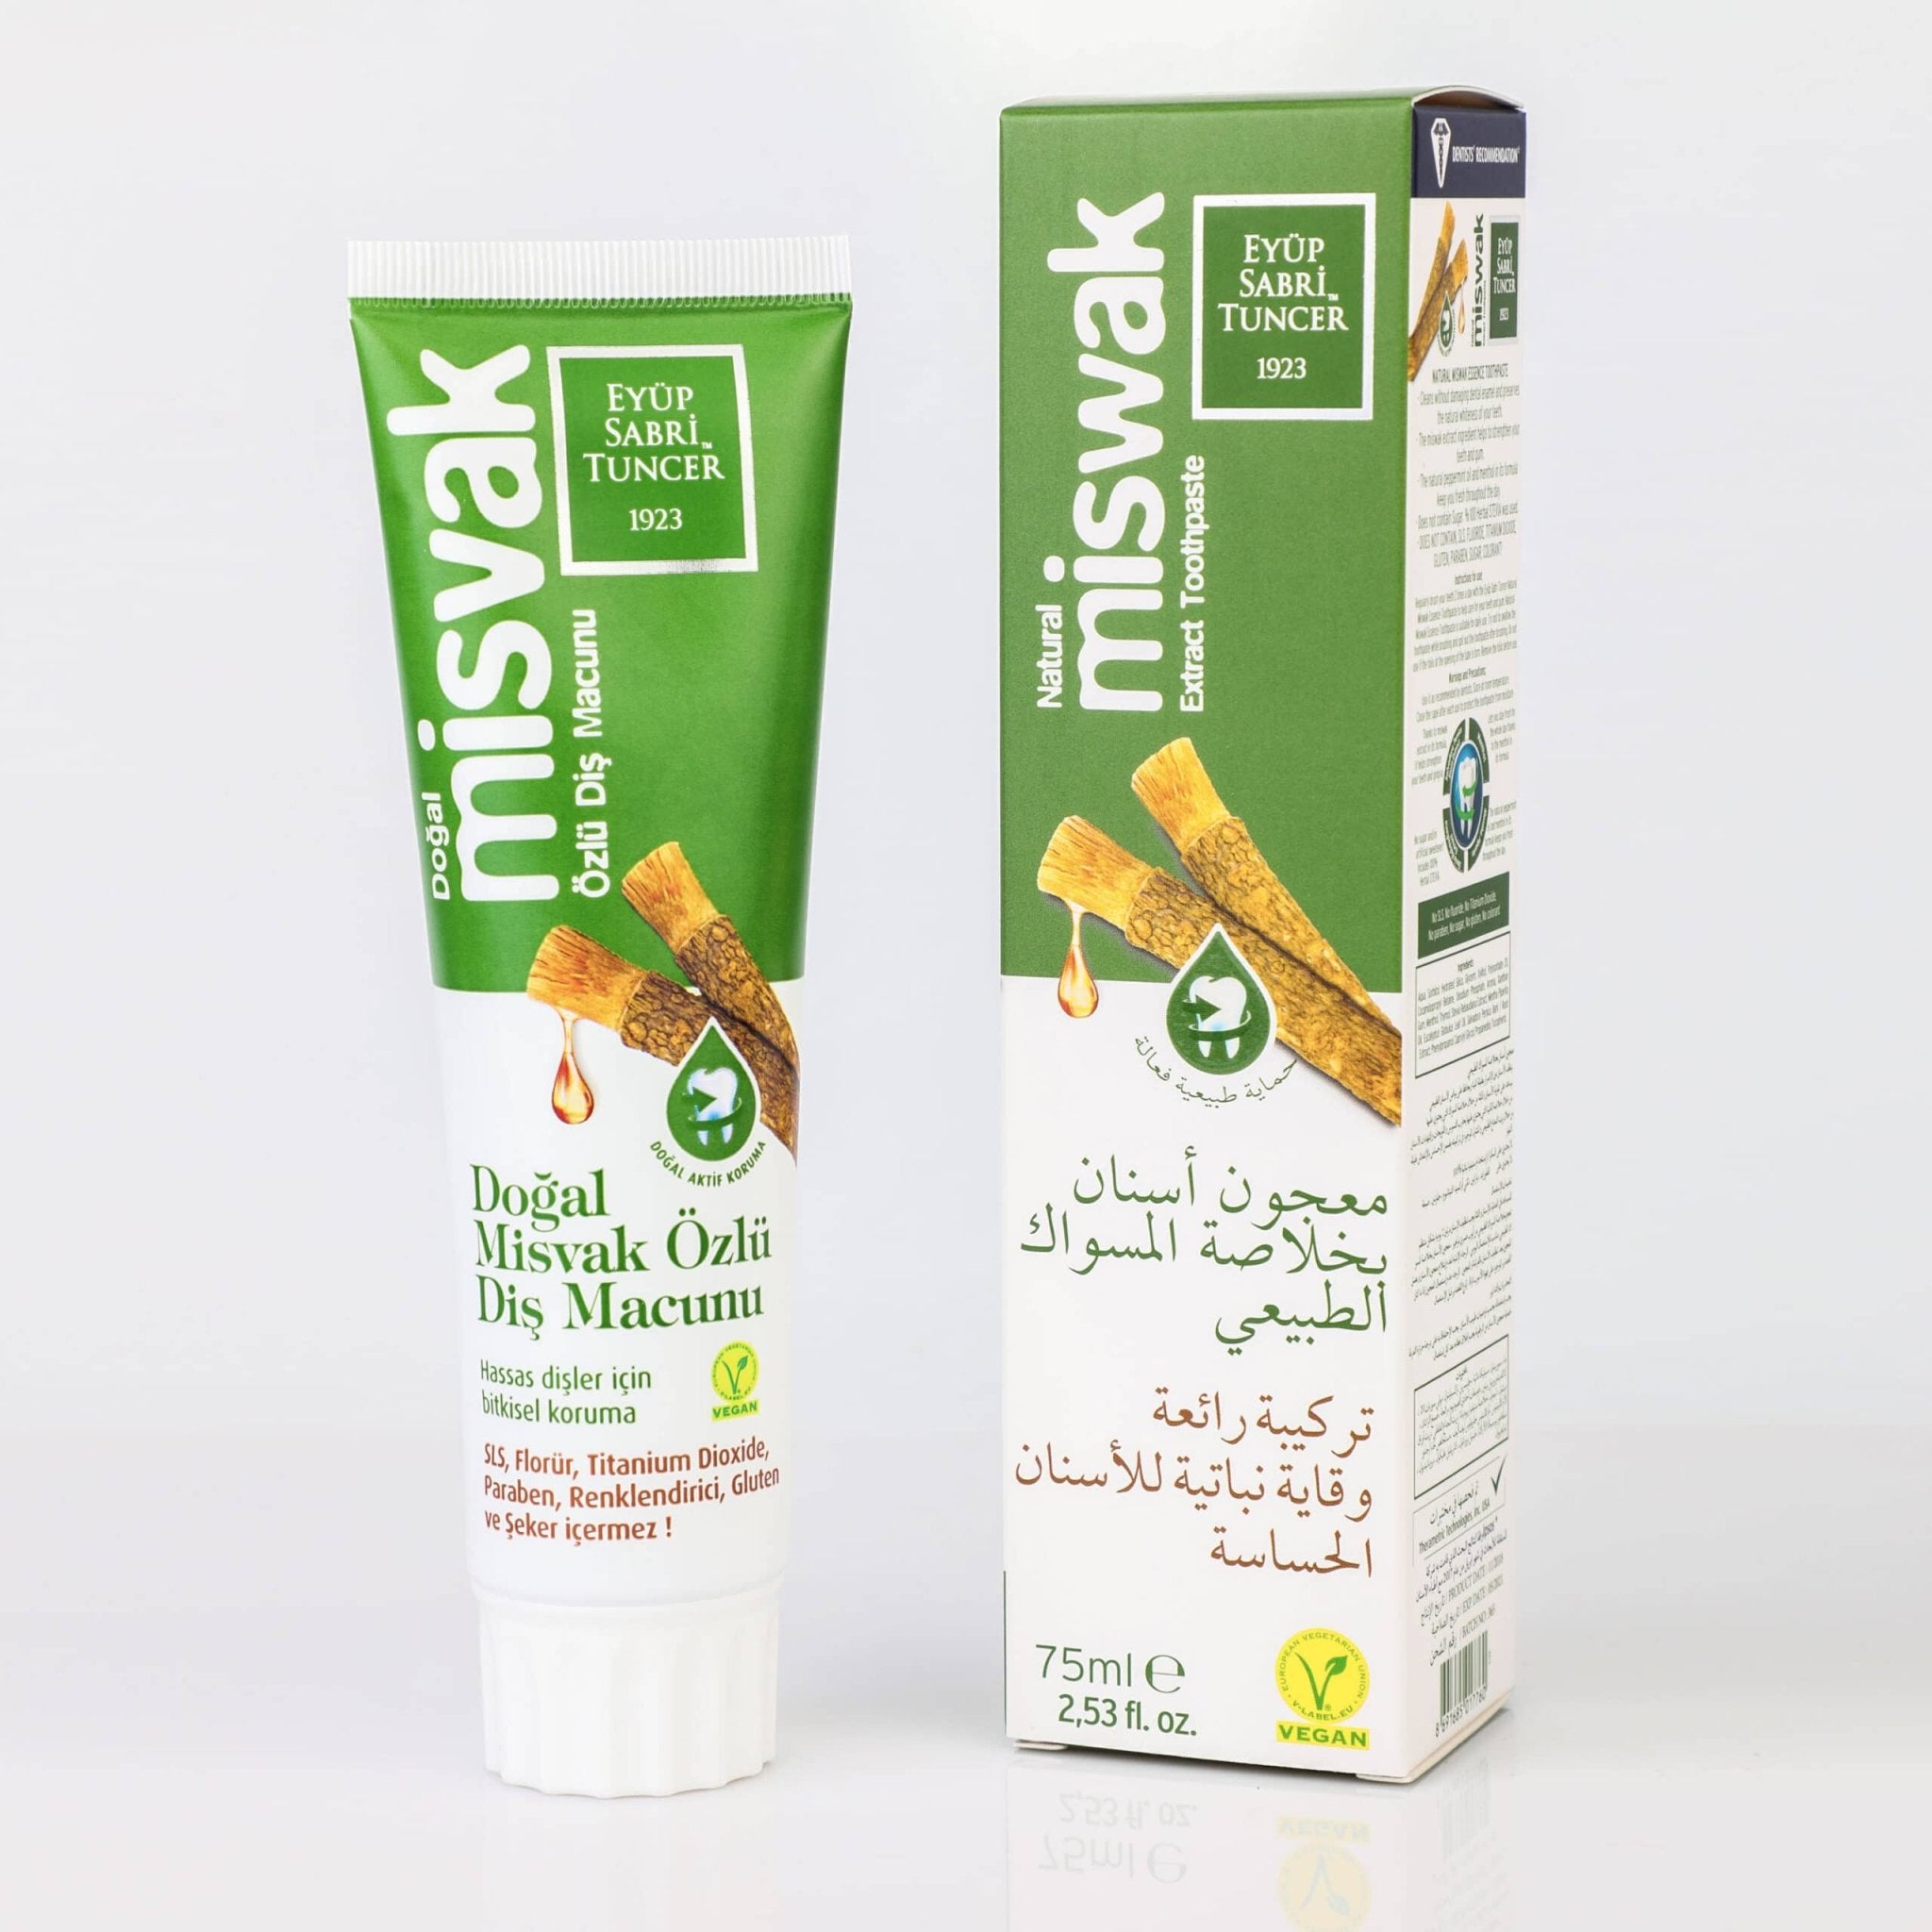 Eyup Sabri Tuncer Toothpaste with Miswak Extract - Aytac Foods